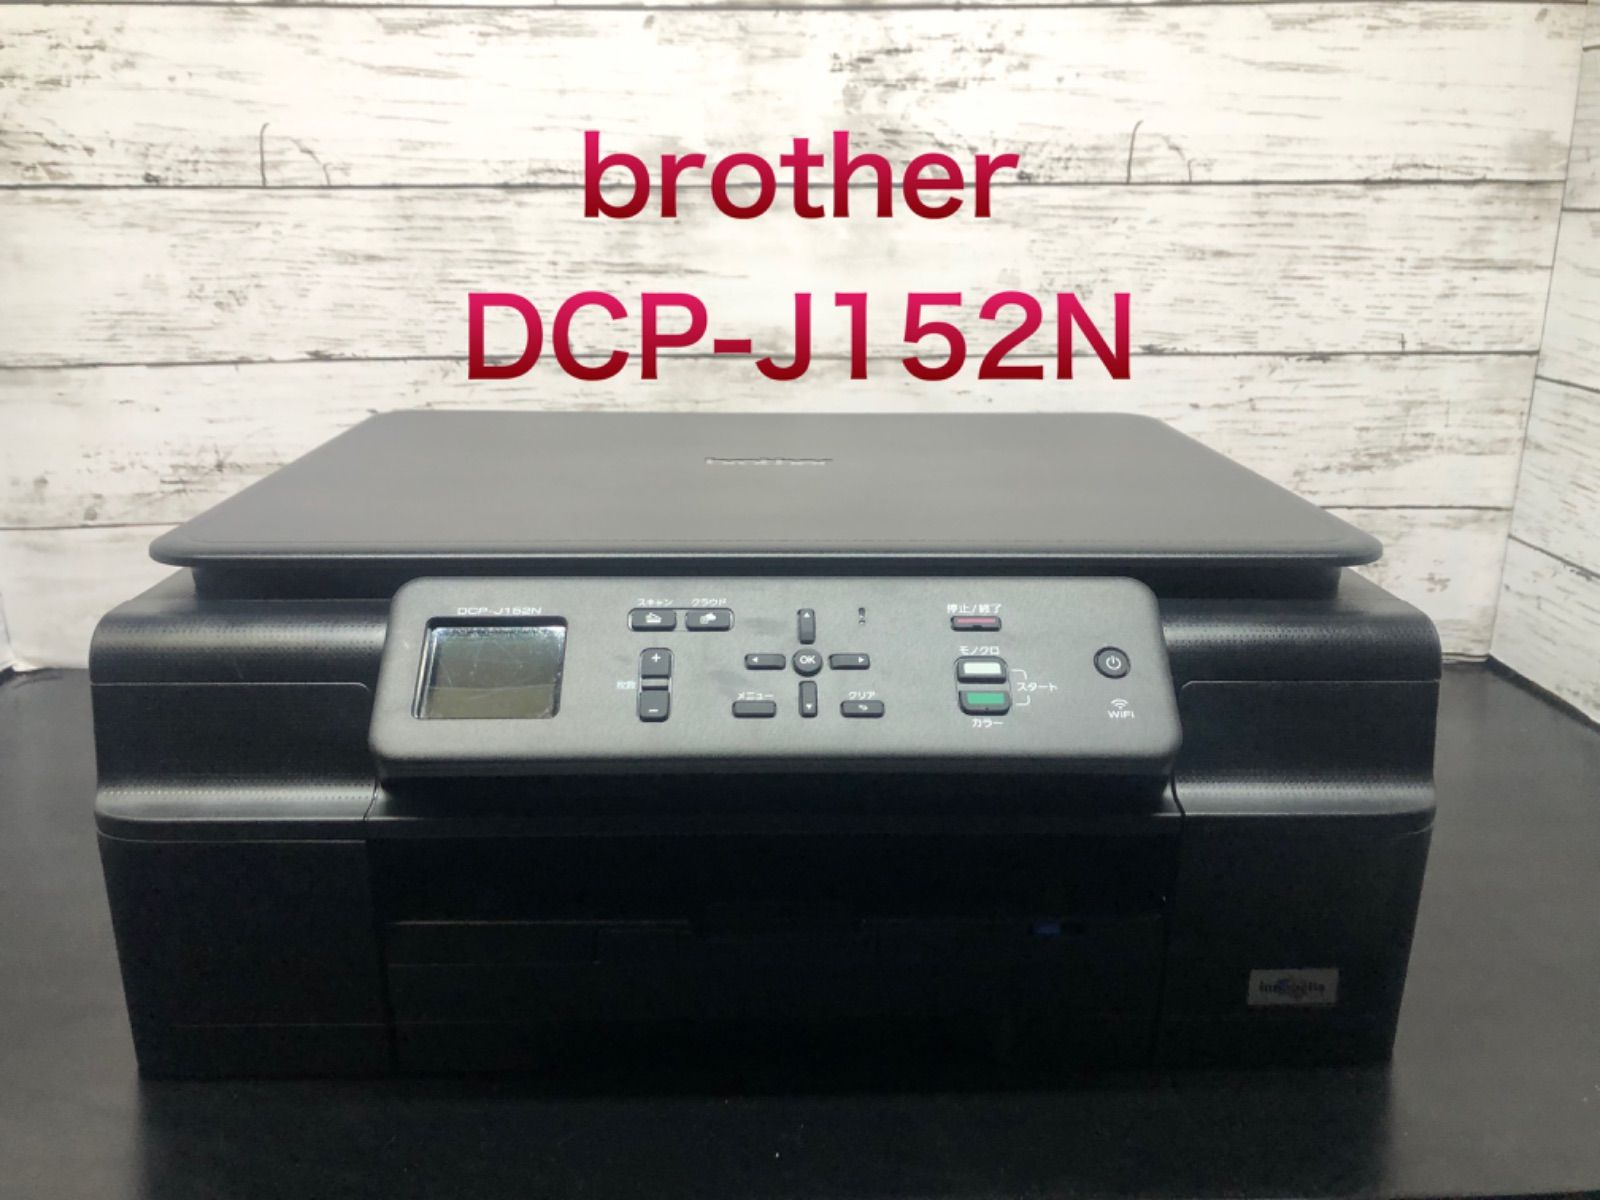 brother プリンター　DCP-J152N